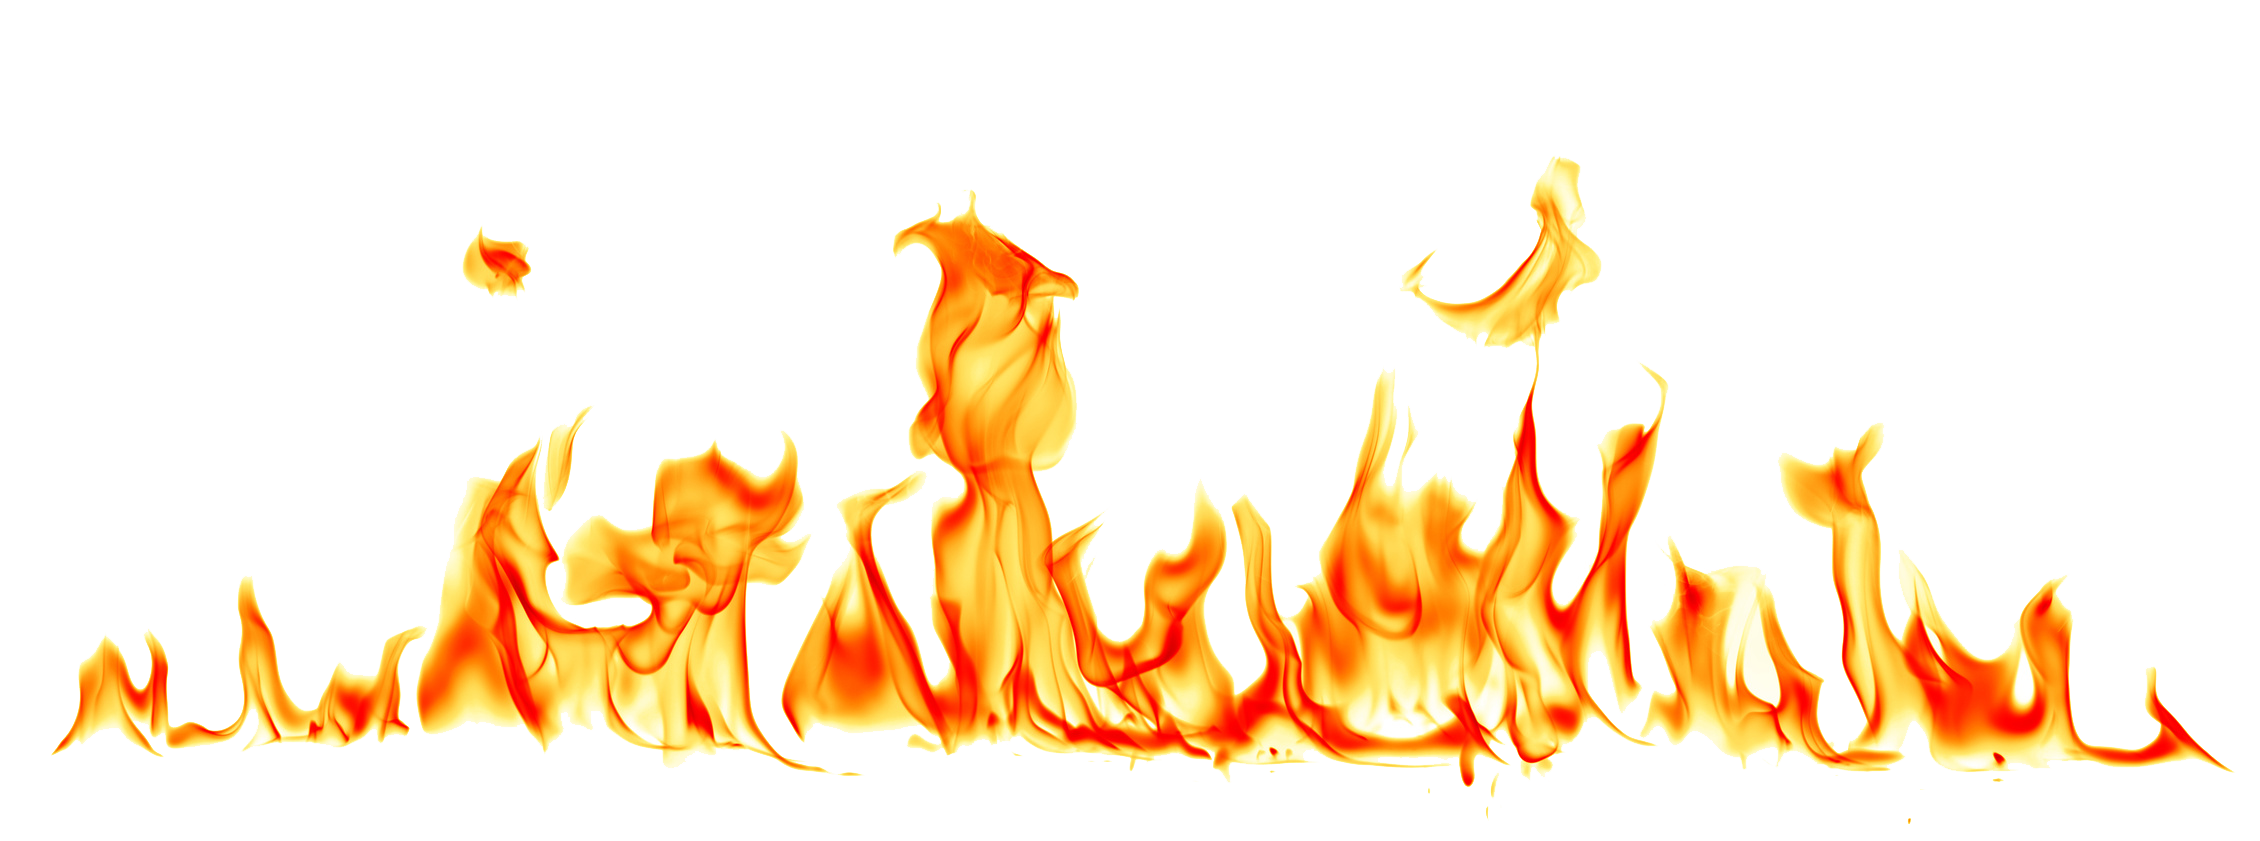 Fire Flame PNG High-Quality Image